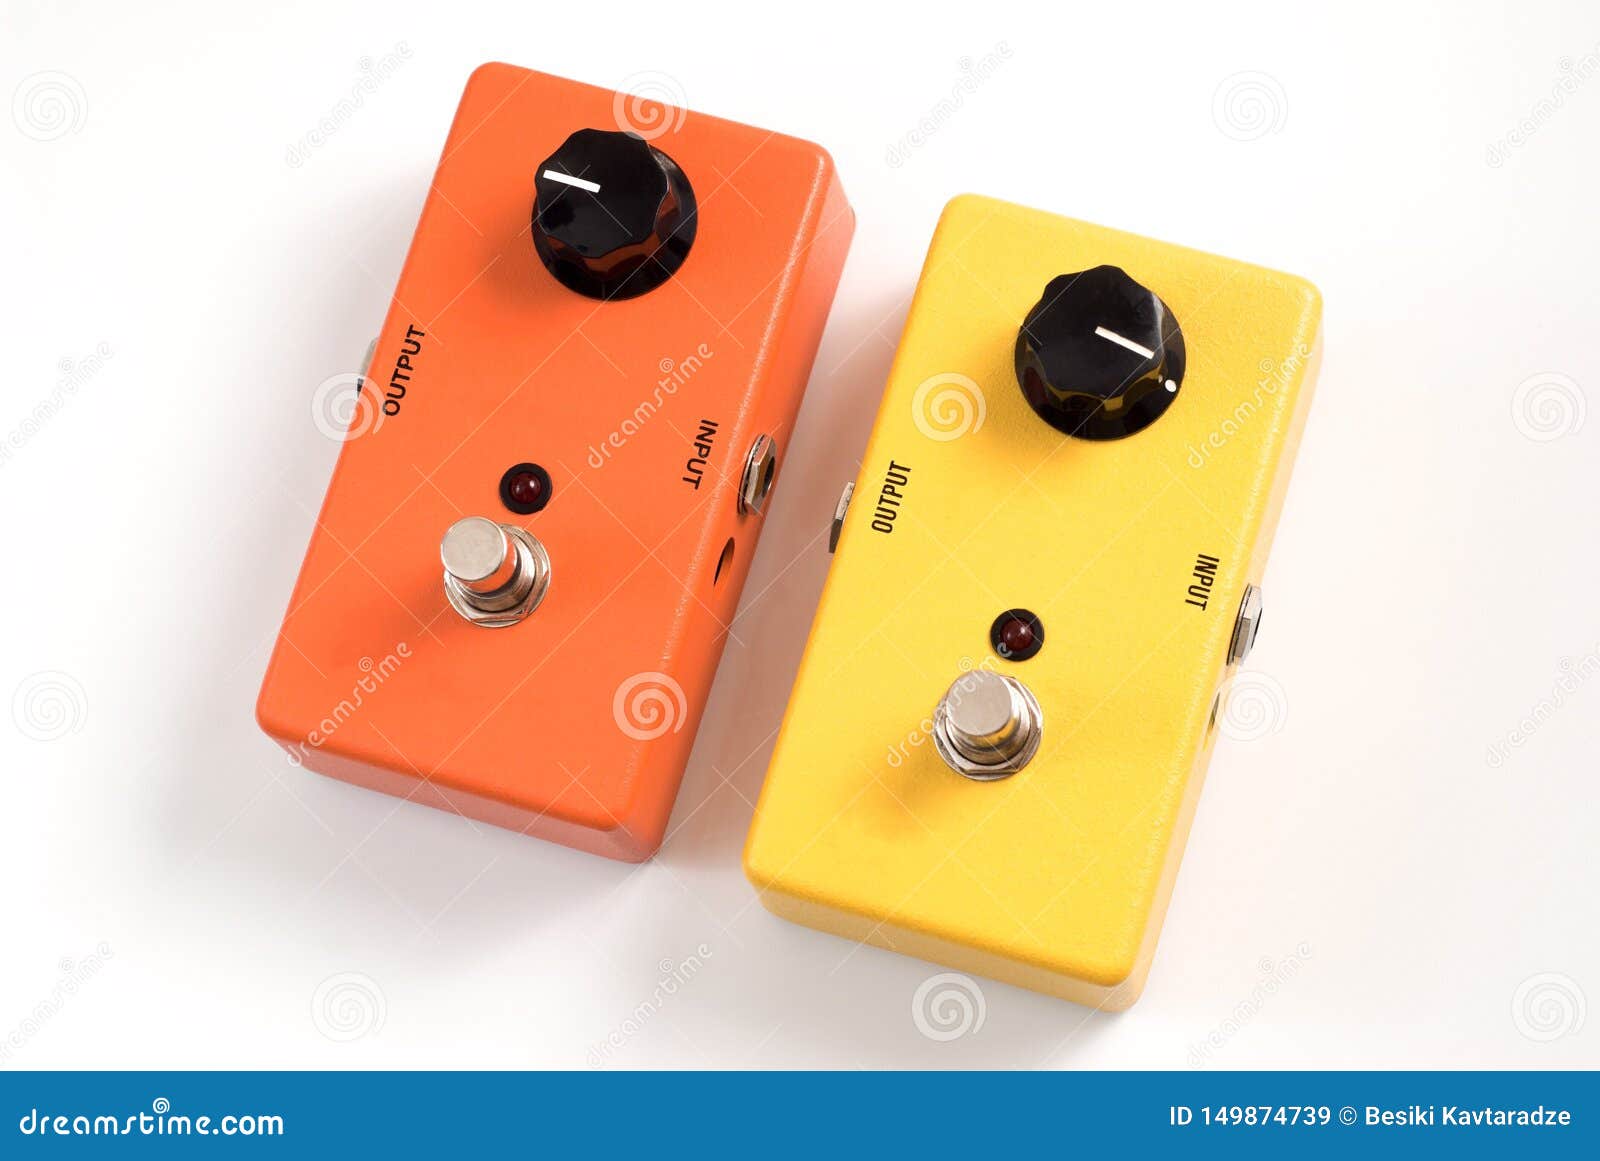 Effect Pedals on White Stock Image - Image of gear, 149874739